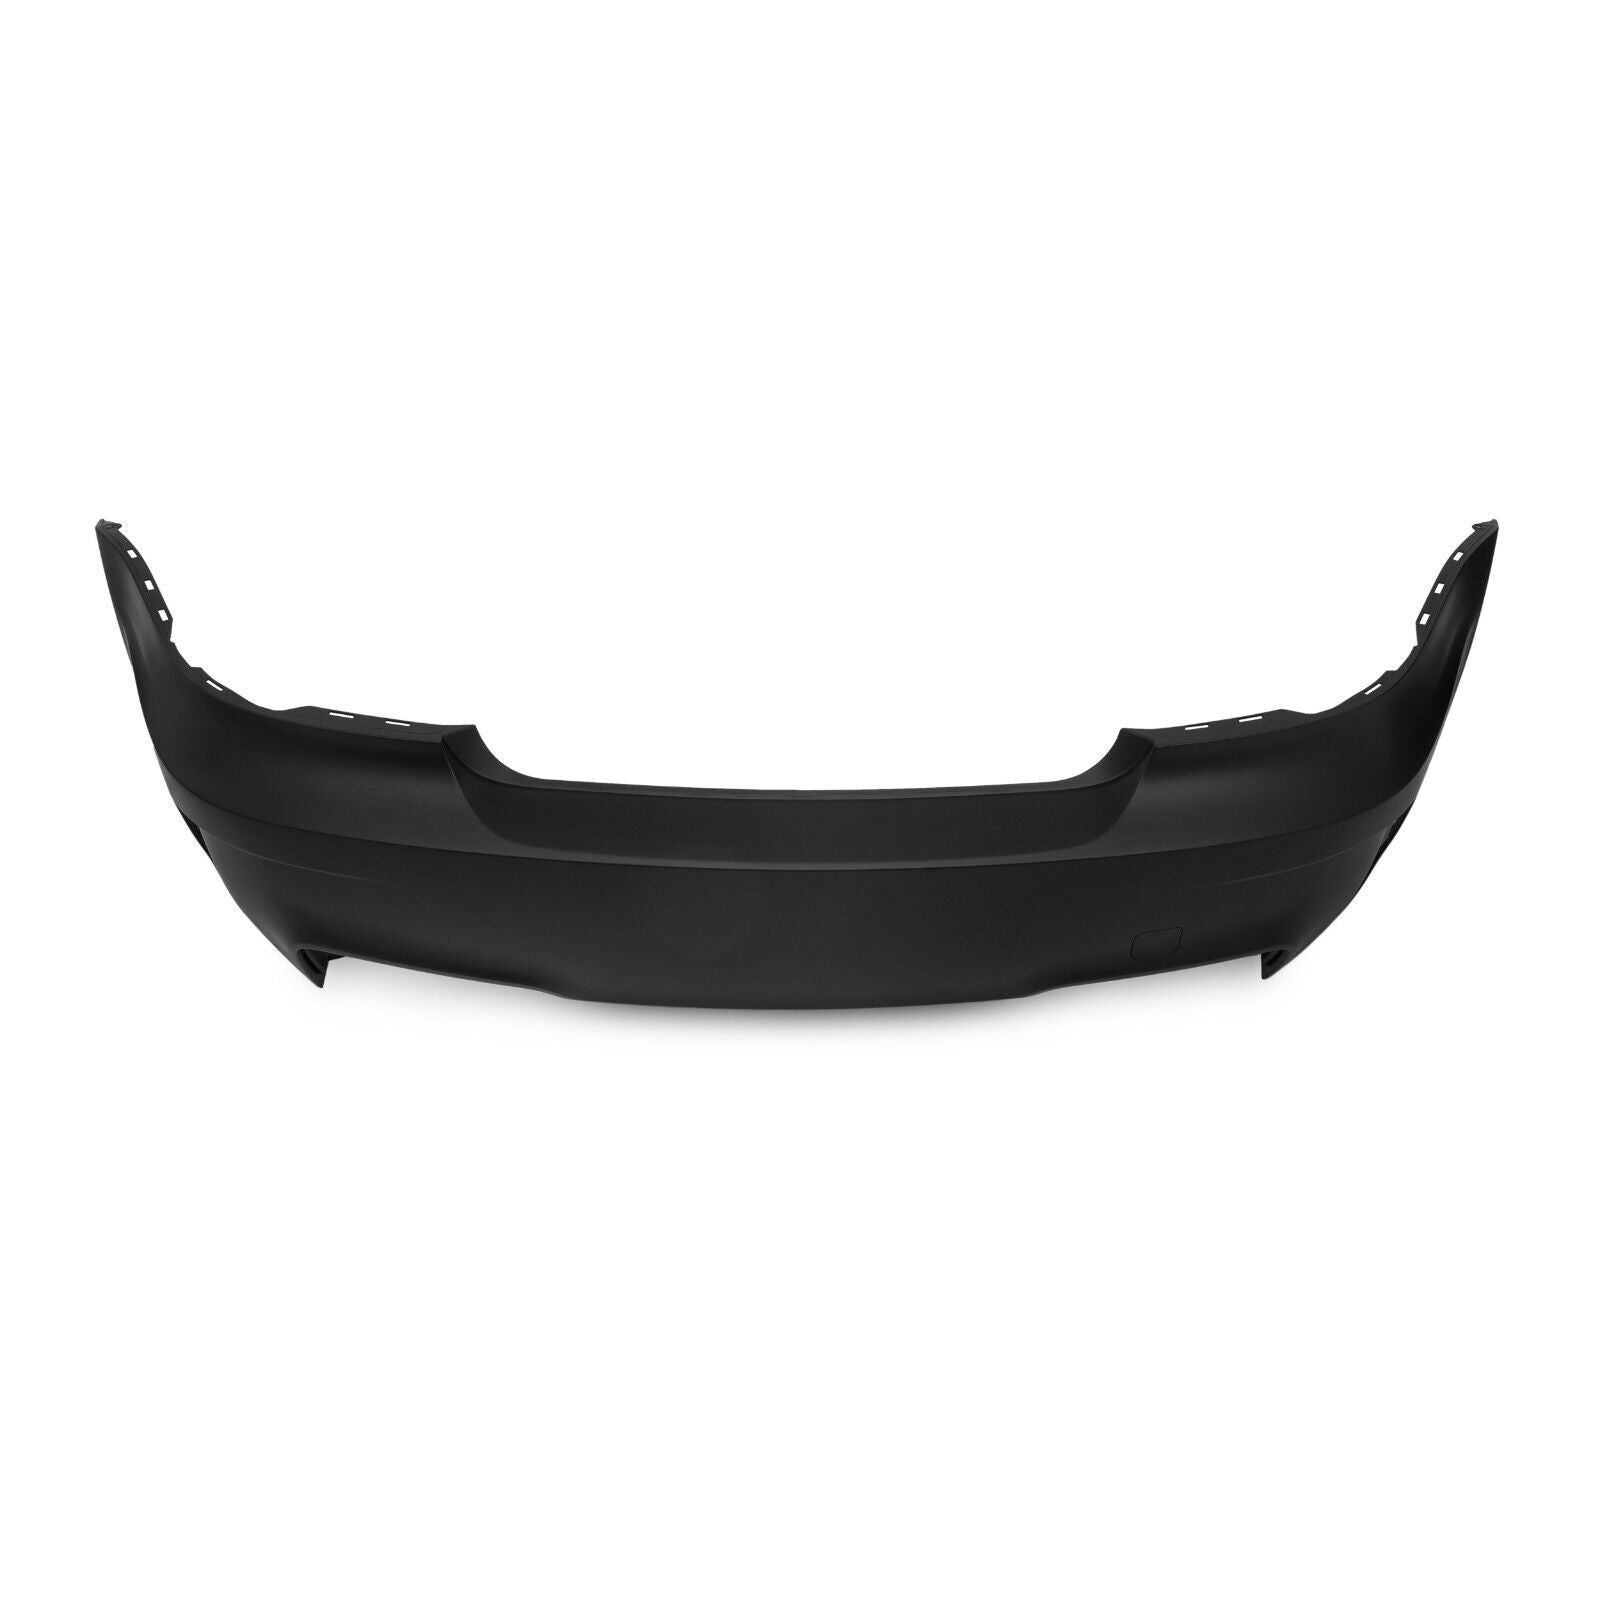 JOM BMW 1er 1-series E82 without PDC 07-11 Rear Bumper Polyp Unpainted